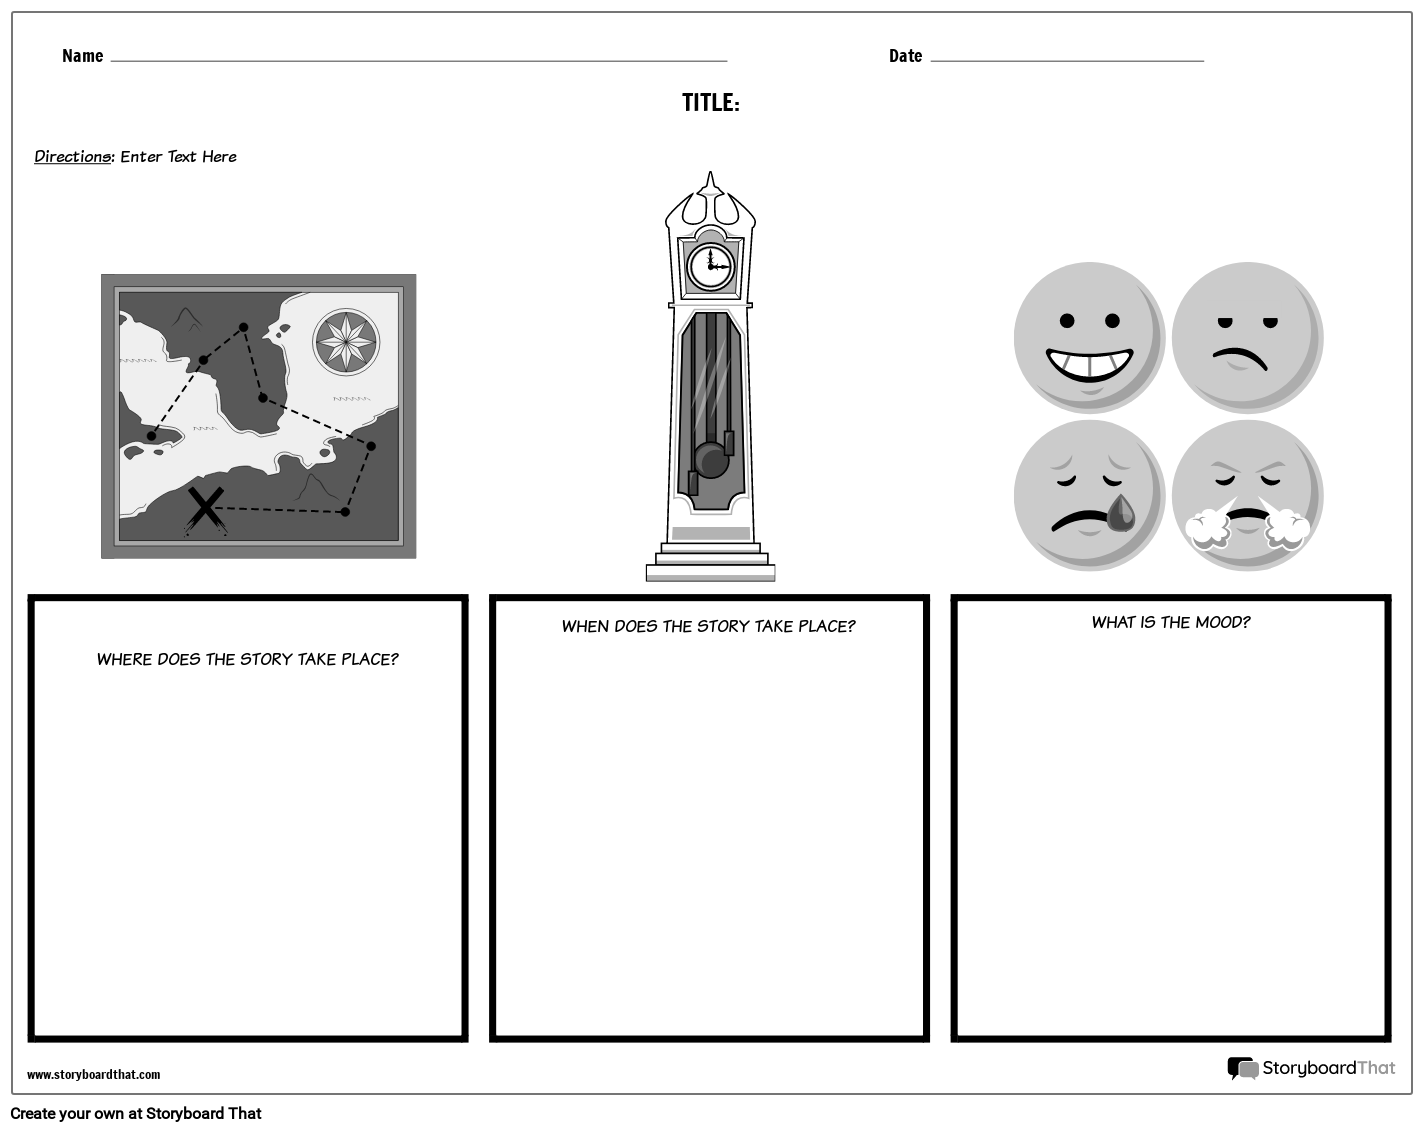 Free Customizable Setting Worksheet Template with Images